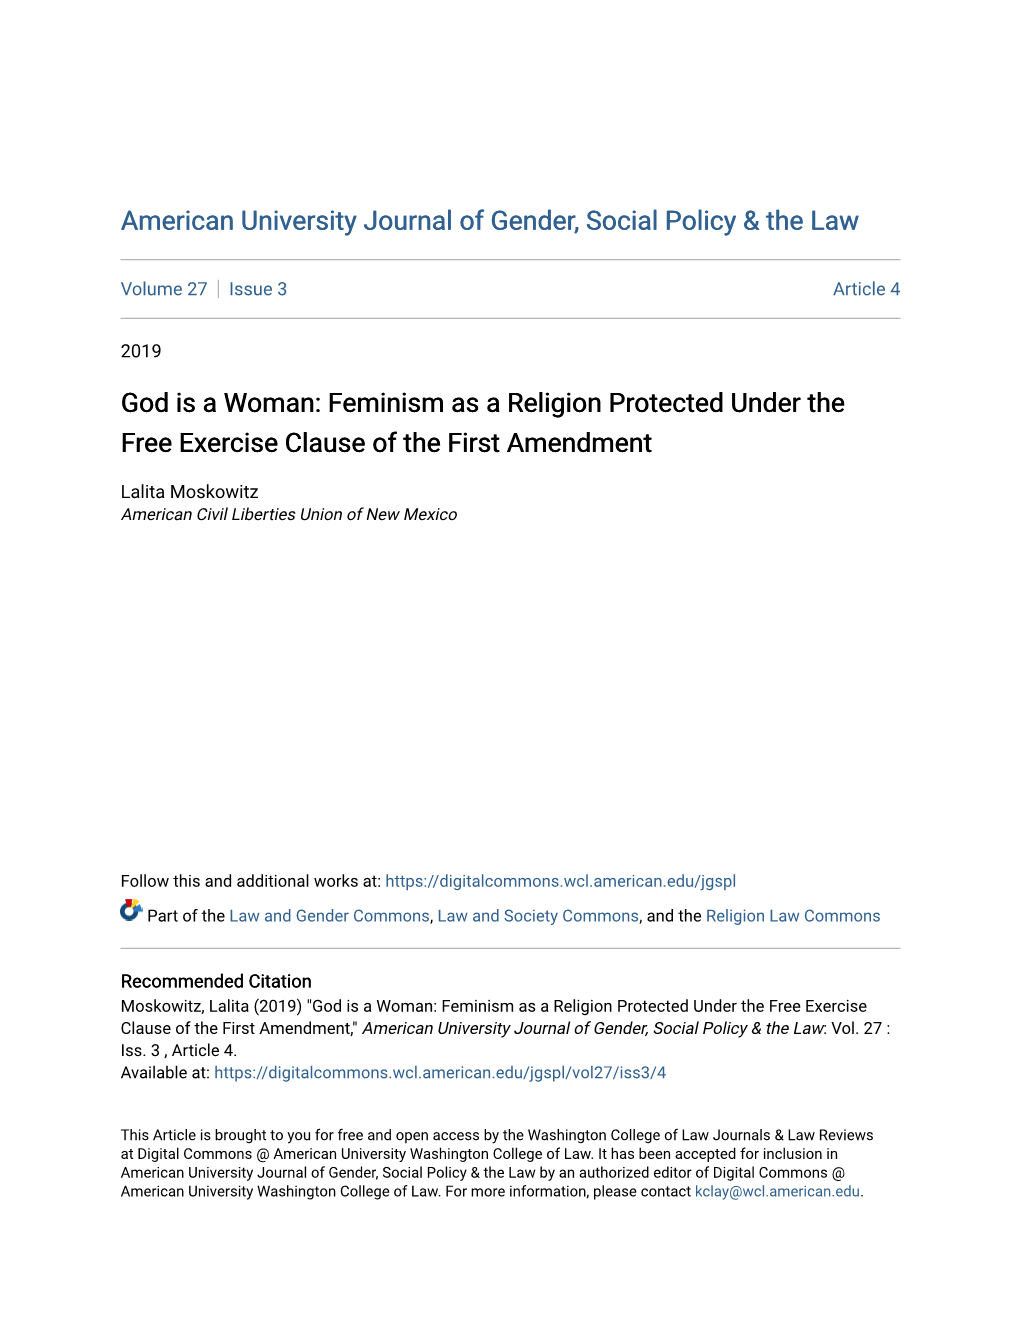 Feminism As a Religion Protected Under the Free Exercise Clause of the First Amendment